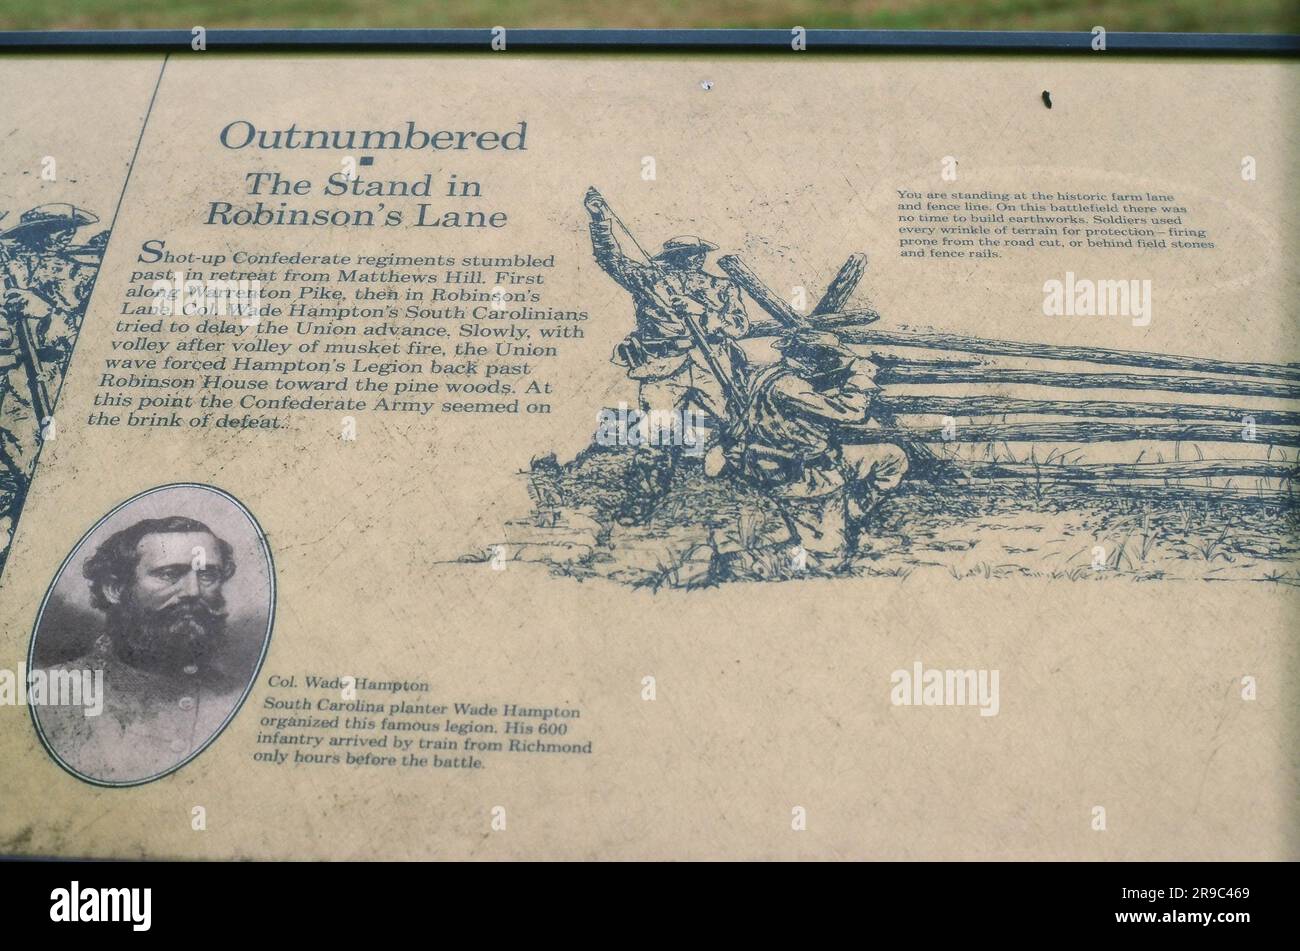 Explanatory sign at the site of the Manassa battle site of The Stand in Robinson's Lane, US Civil War, 1861, Virginia, US Stock Photo